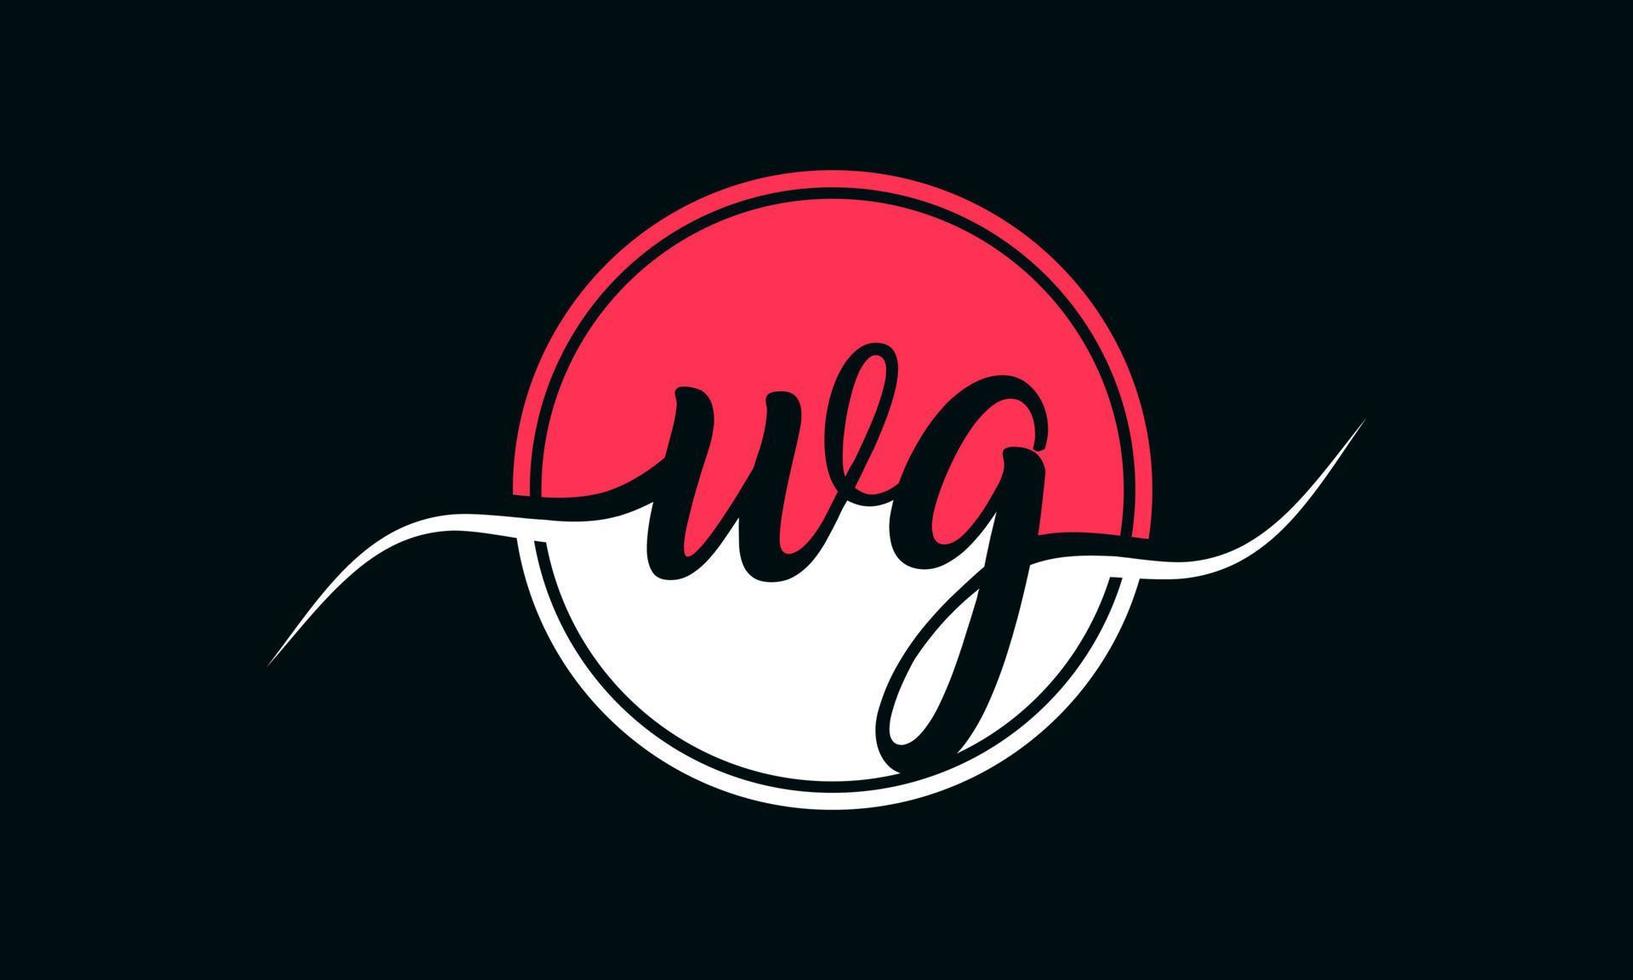 initial WG letter logo with inside circle in white and pink color. pro vector. vector